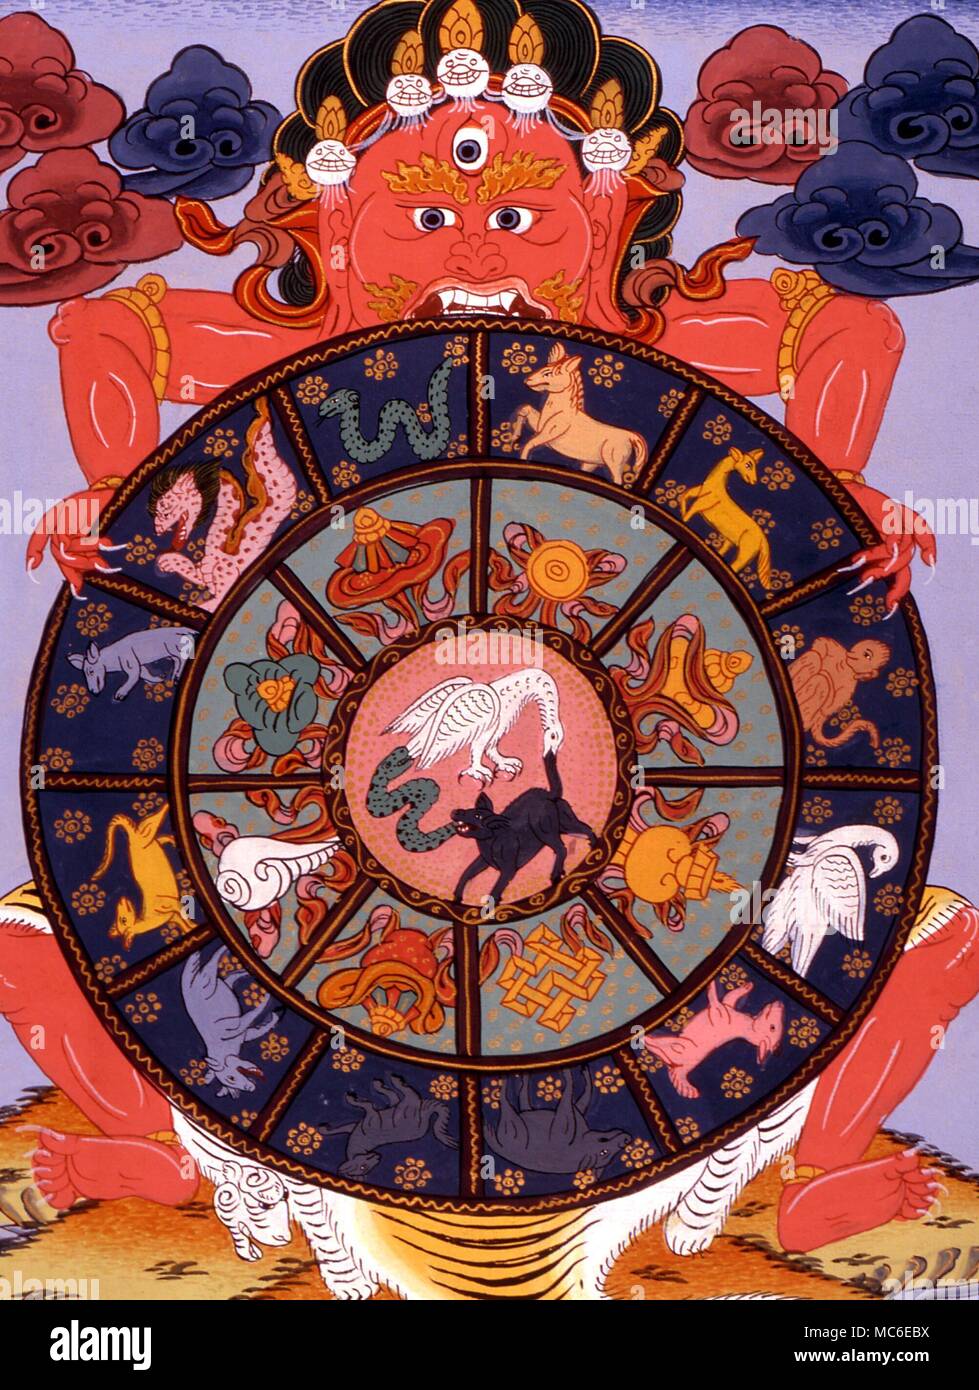 The Chinese Zodiac with the characters and images of the twelve animals  representing the twelve zodiacal signs, held in the hands of the demon  Mara. In the centre of the circle are